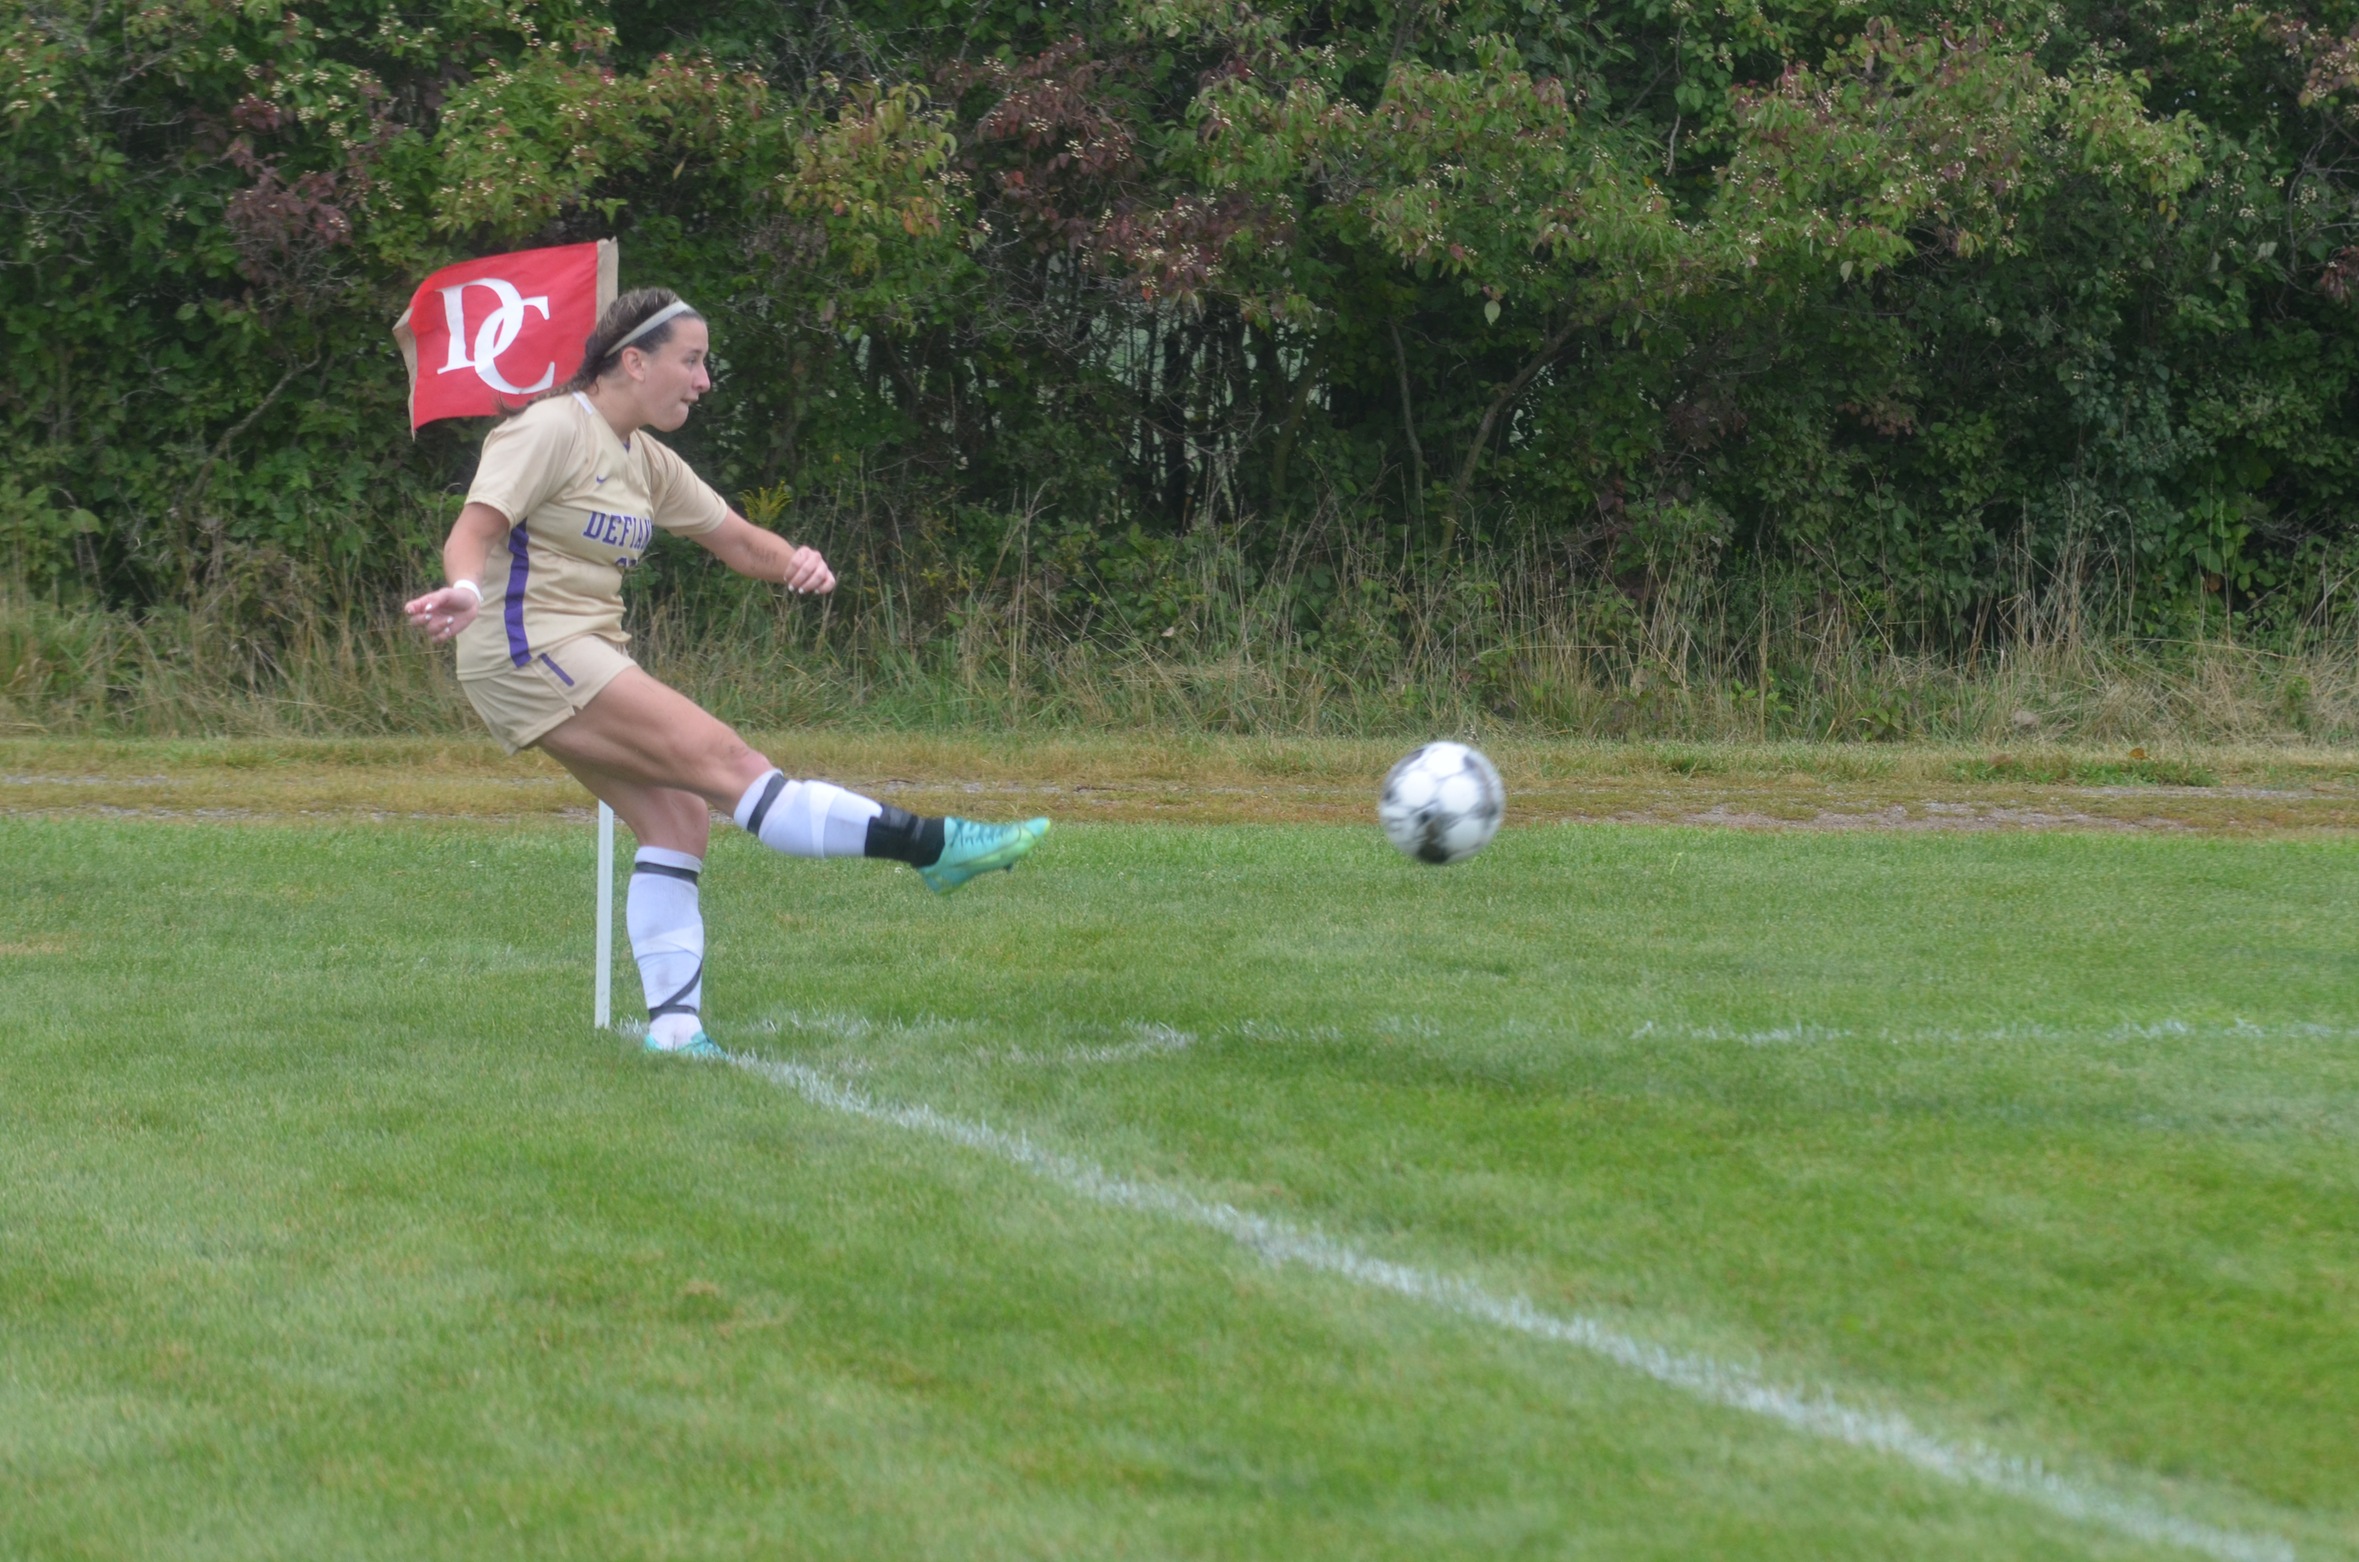 Women’s Soccer finishes season with 7-0 home loss to Mount St. Joseph